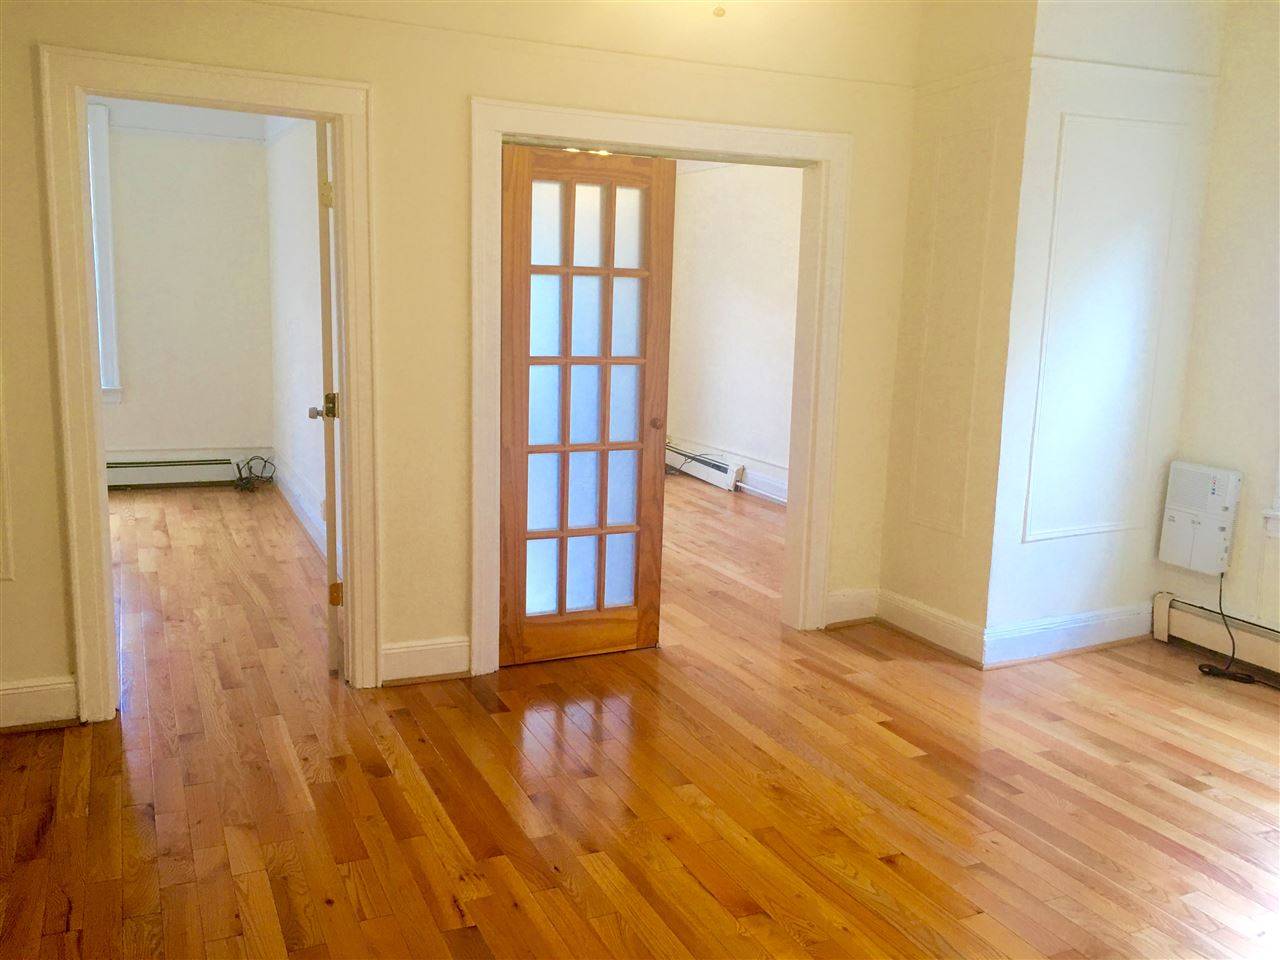 This charming 2 bed 1 bath apartment is only a 13 min walk to the West Side Light Rail Station